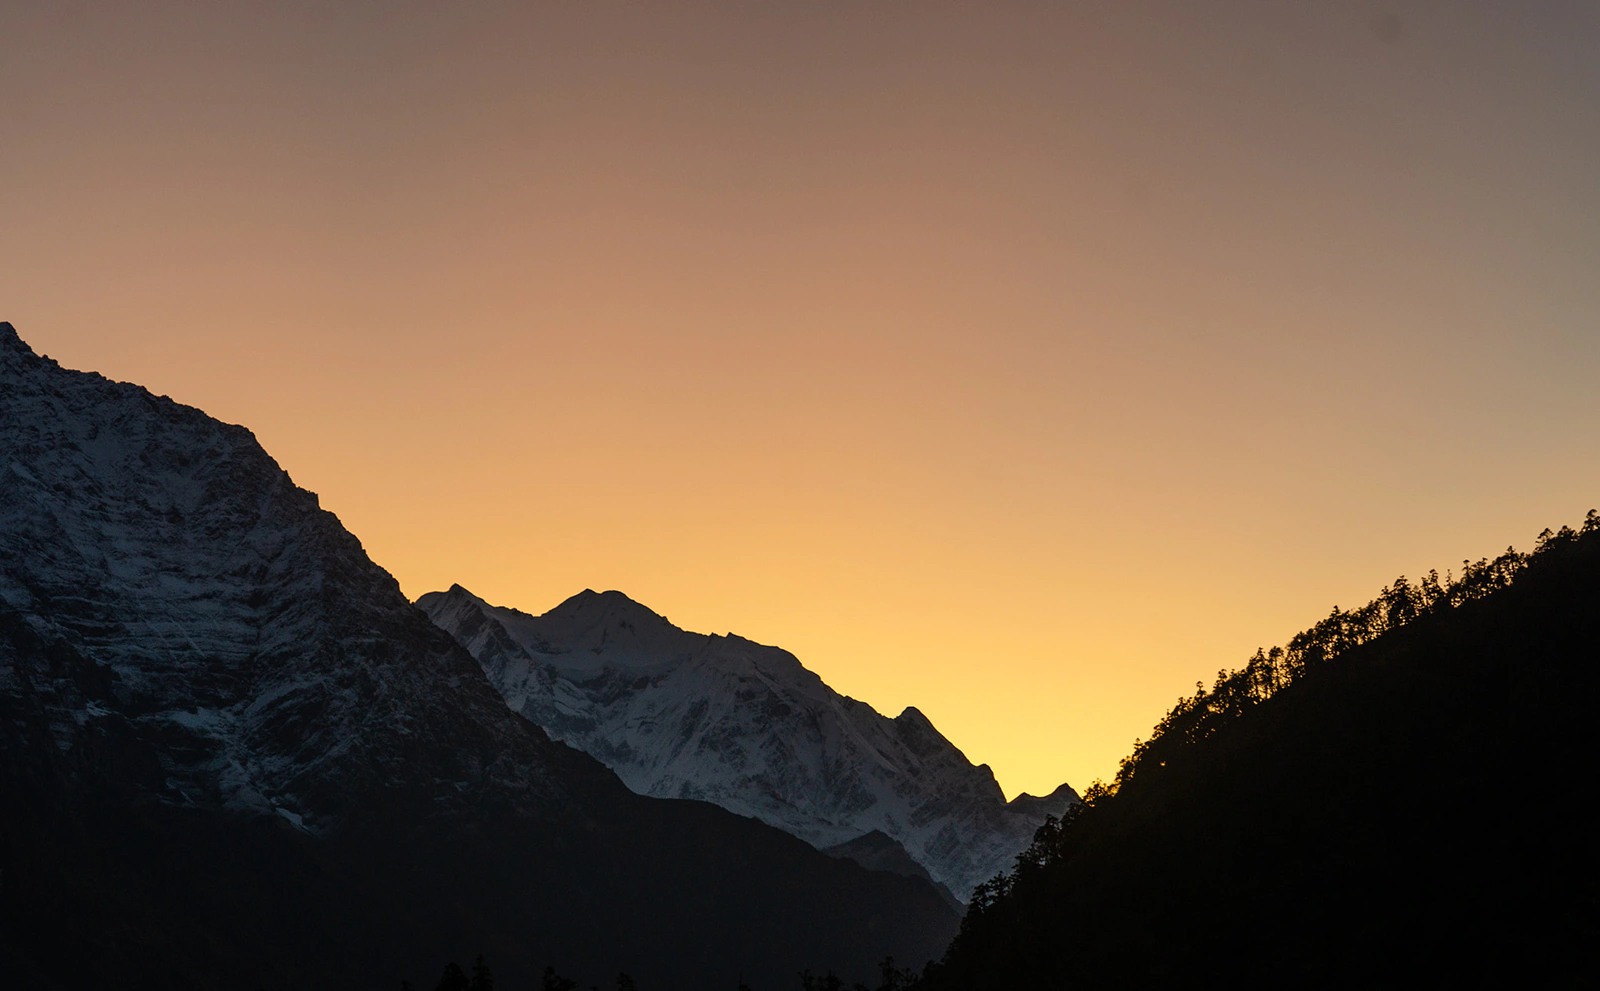 The soothing orange light in the dawn. View from Shyala, Gorkha in Manaslu Circuit